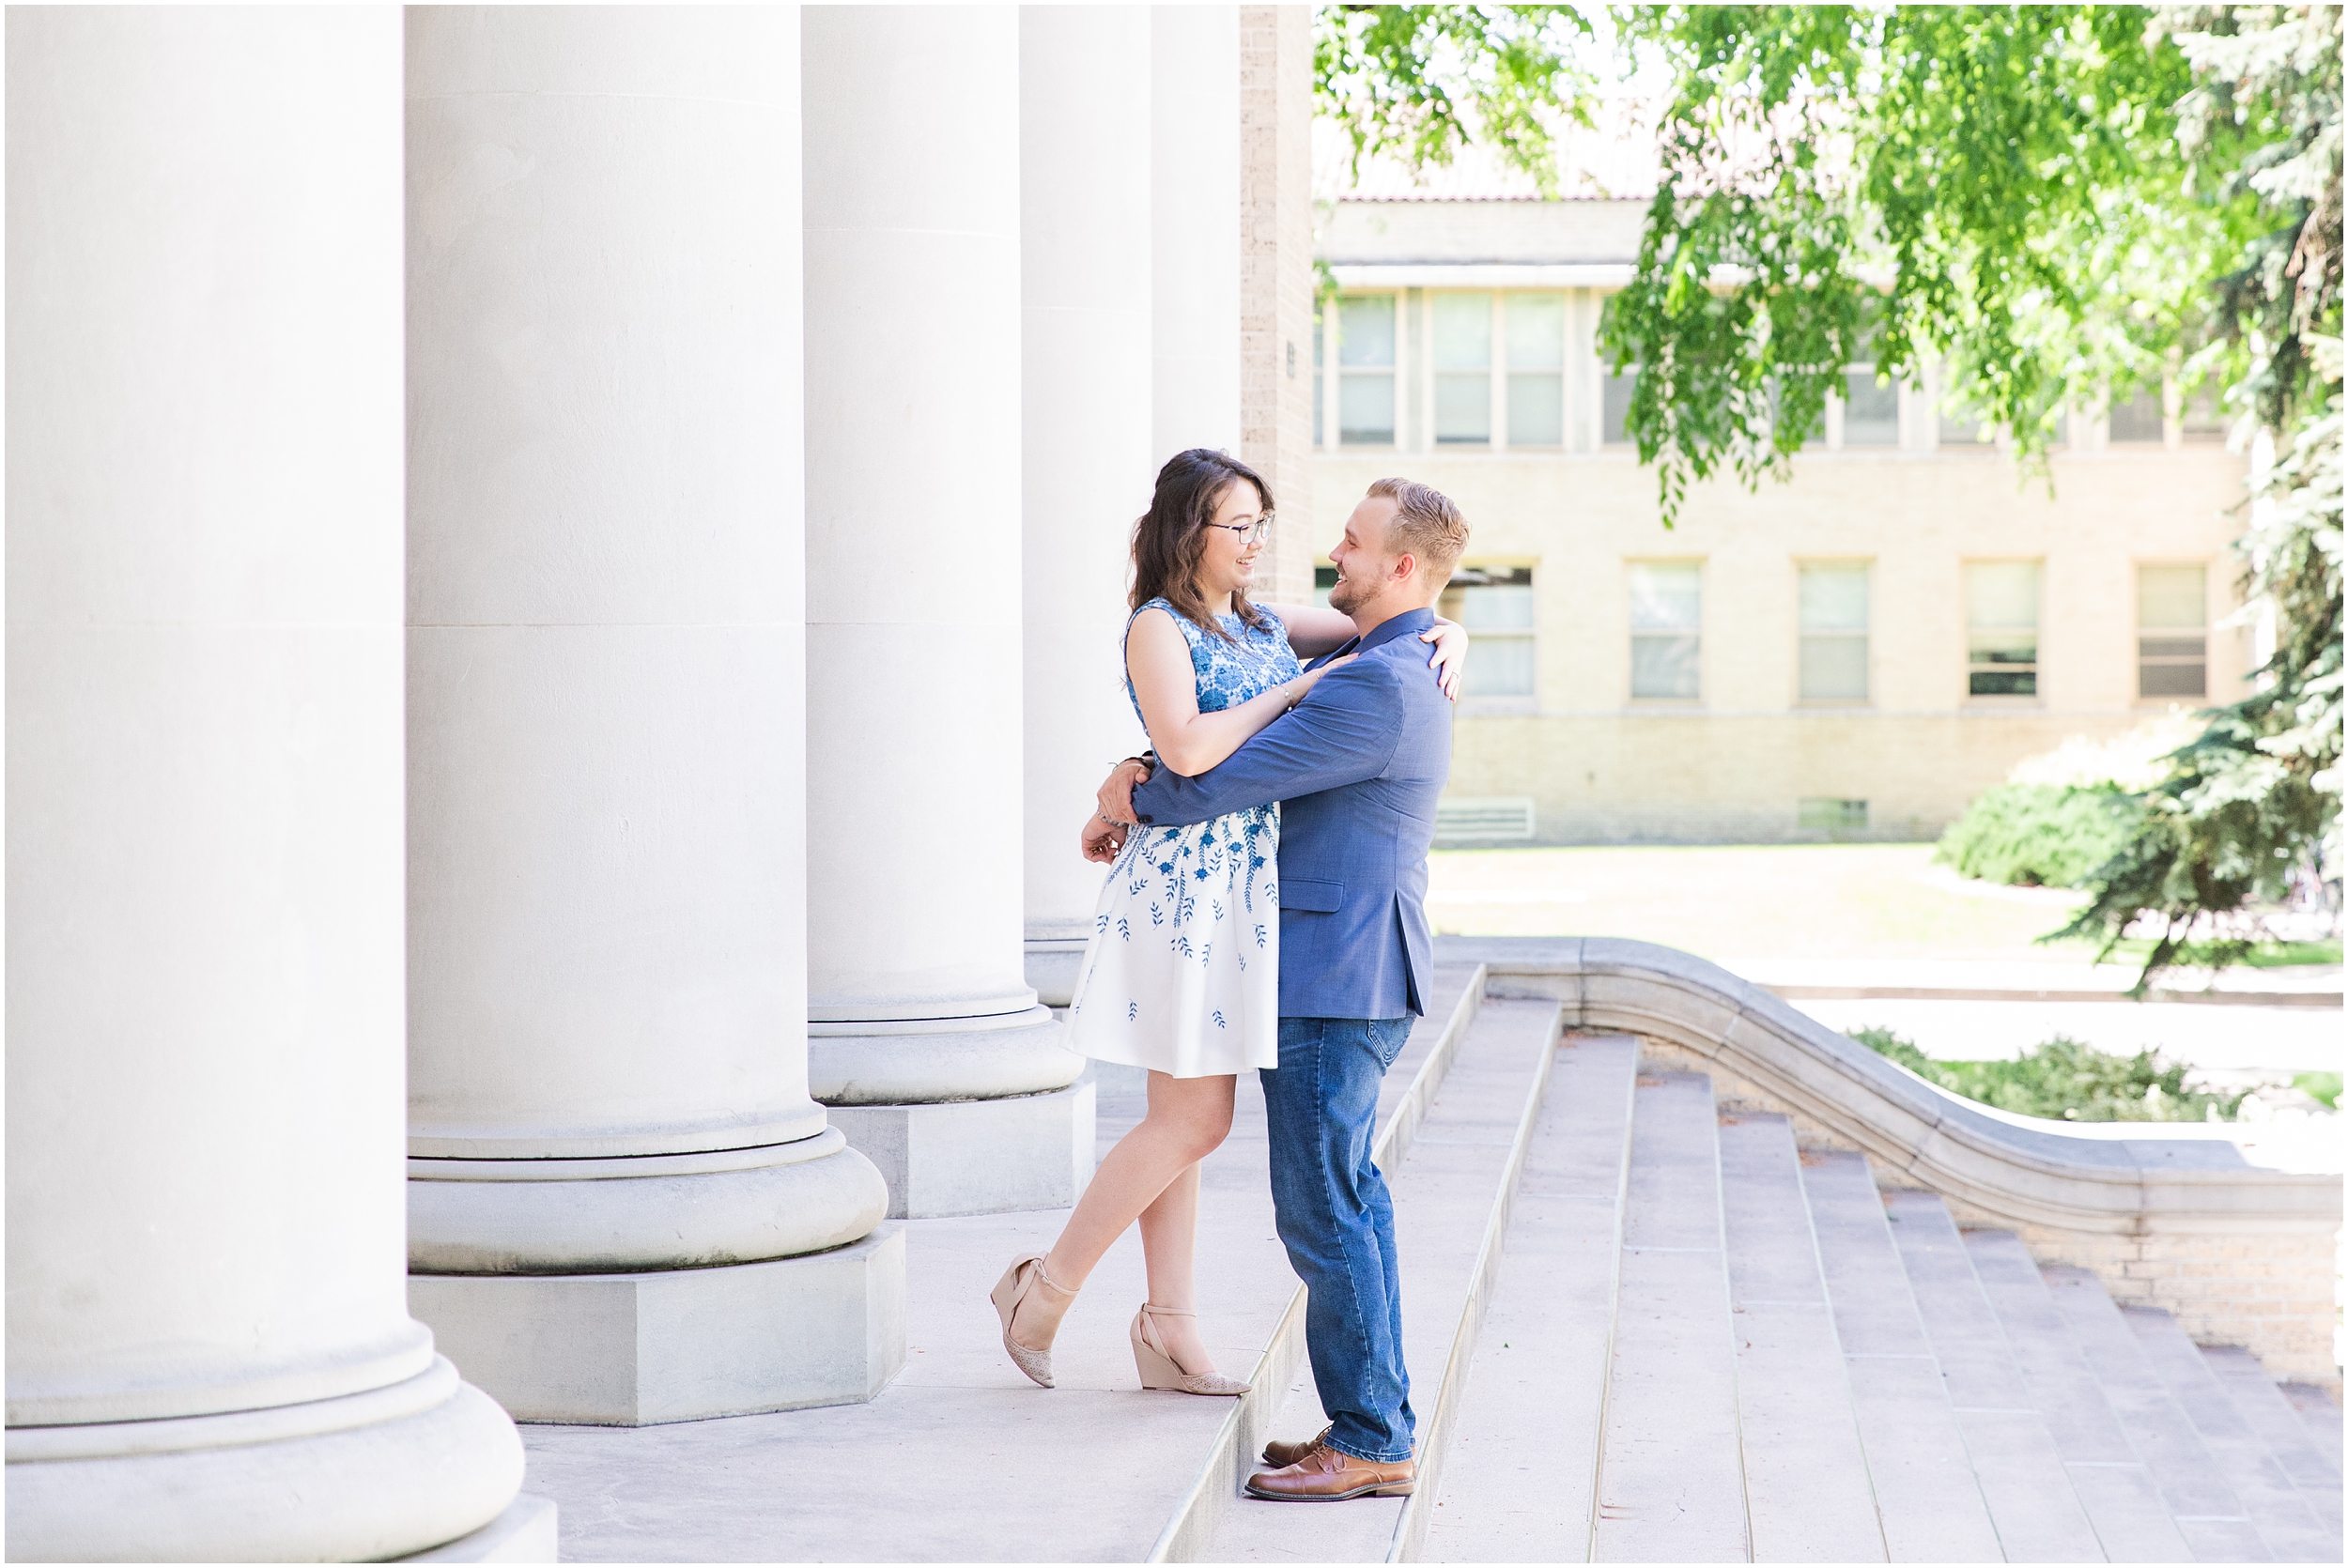 Josh and Brendas Engagement Session in Fort Collins at the Oval